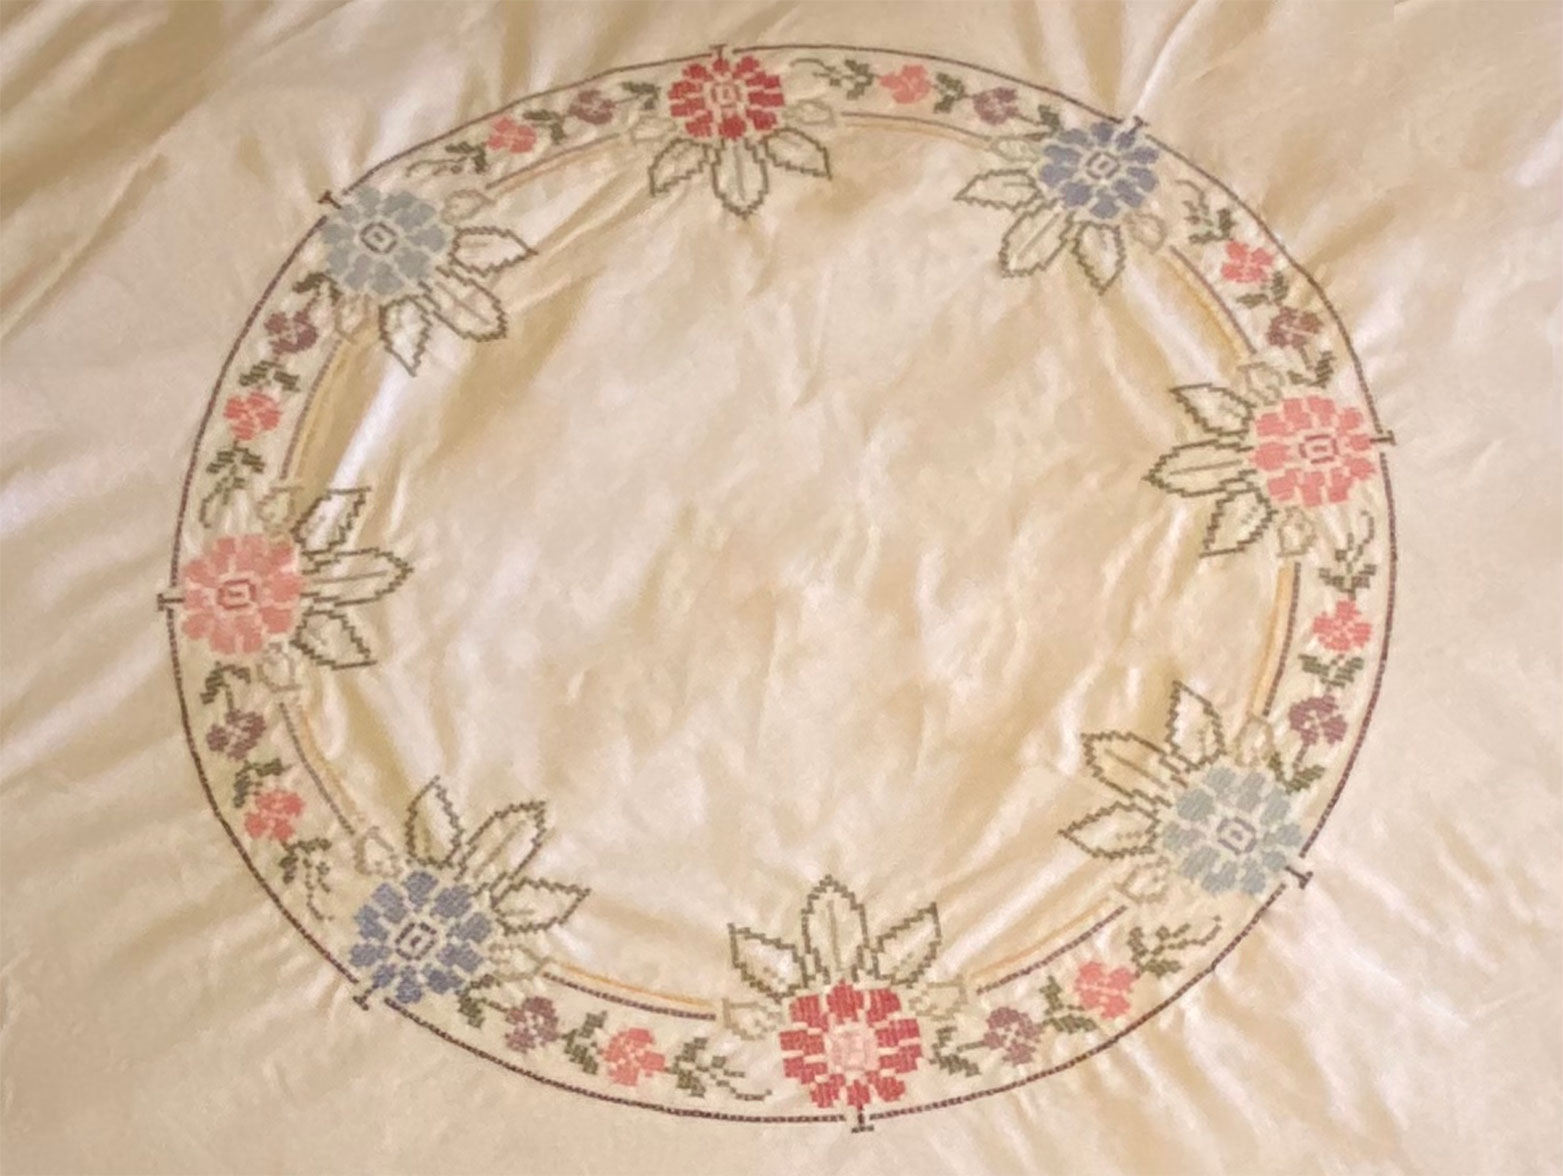 A tablecloth with a large circle. The circle is made from a needlepoint pattern of colourful flowers. The artwork is by Antoinette Charlebois.